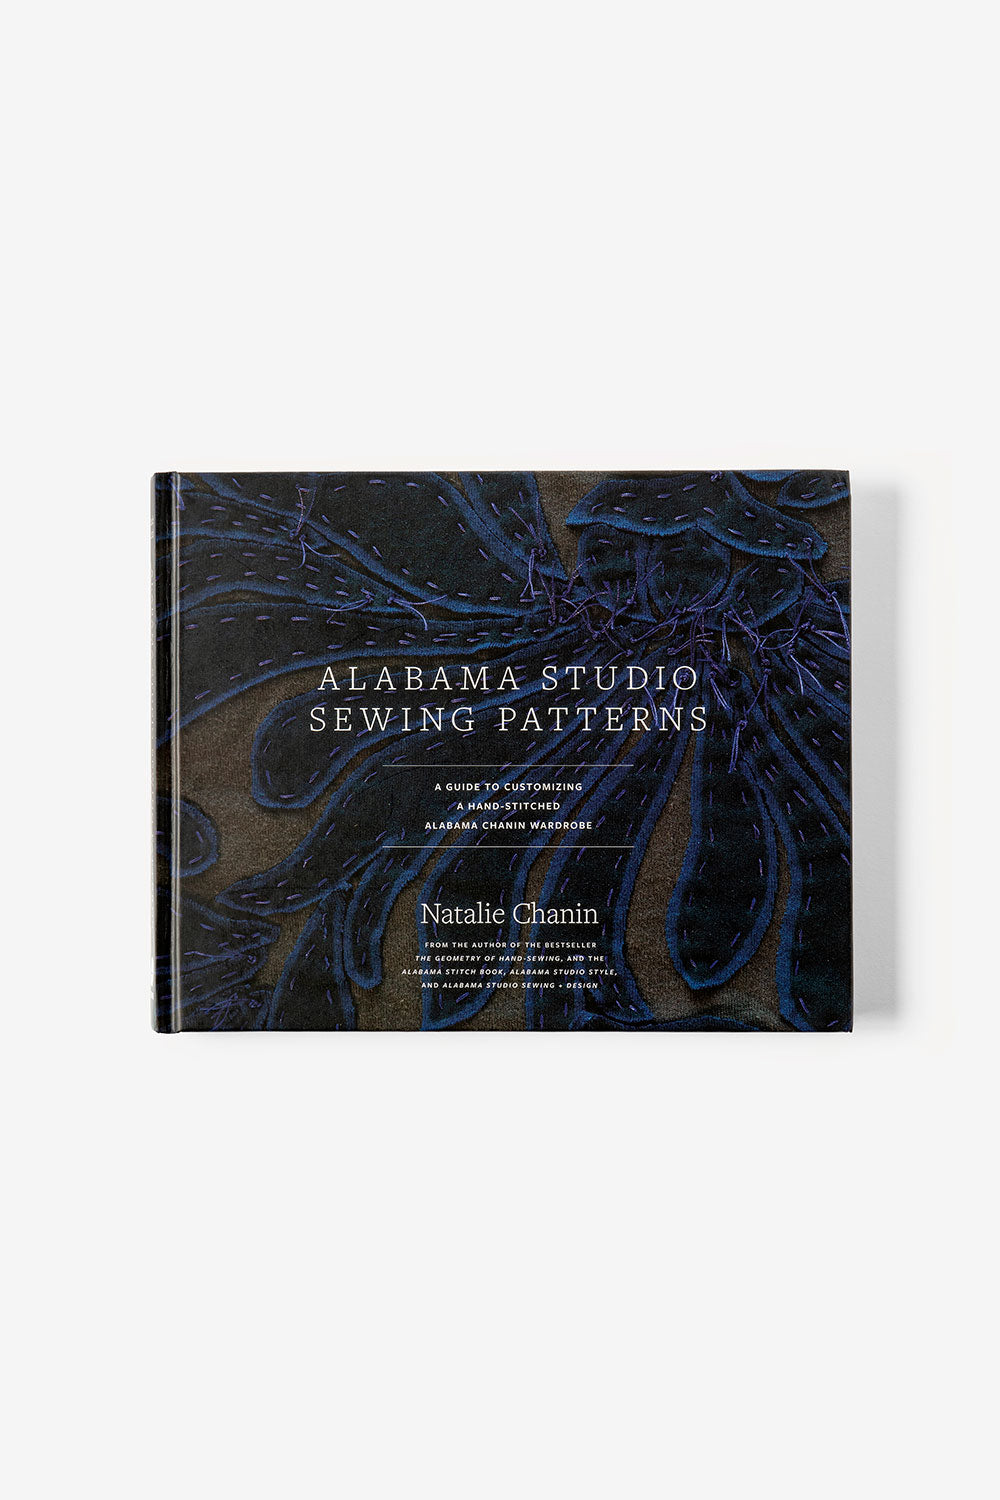 Front Cover of Alabama Studio Sewing Patterns by Natalie Chanin